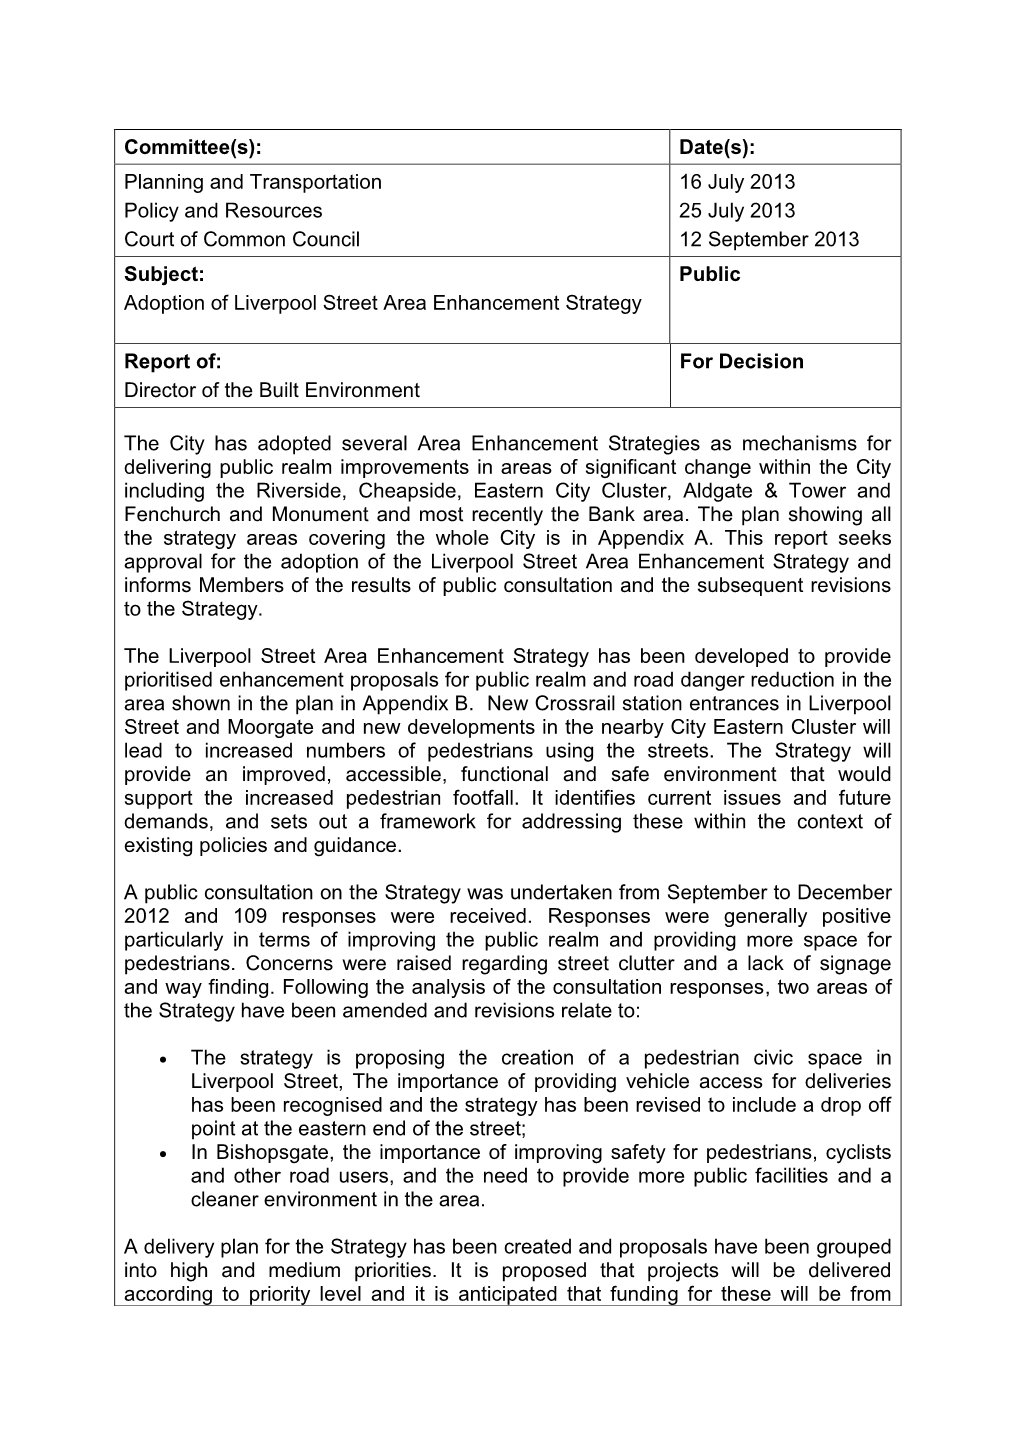 Report Of: for Decision Director of the Built Environment